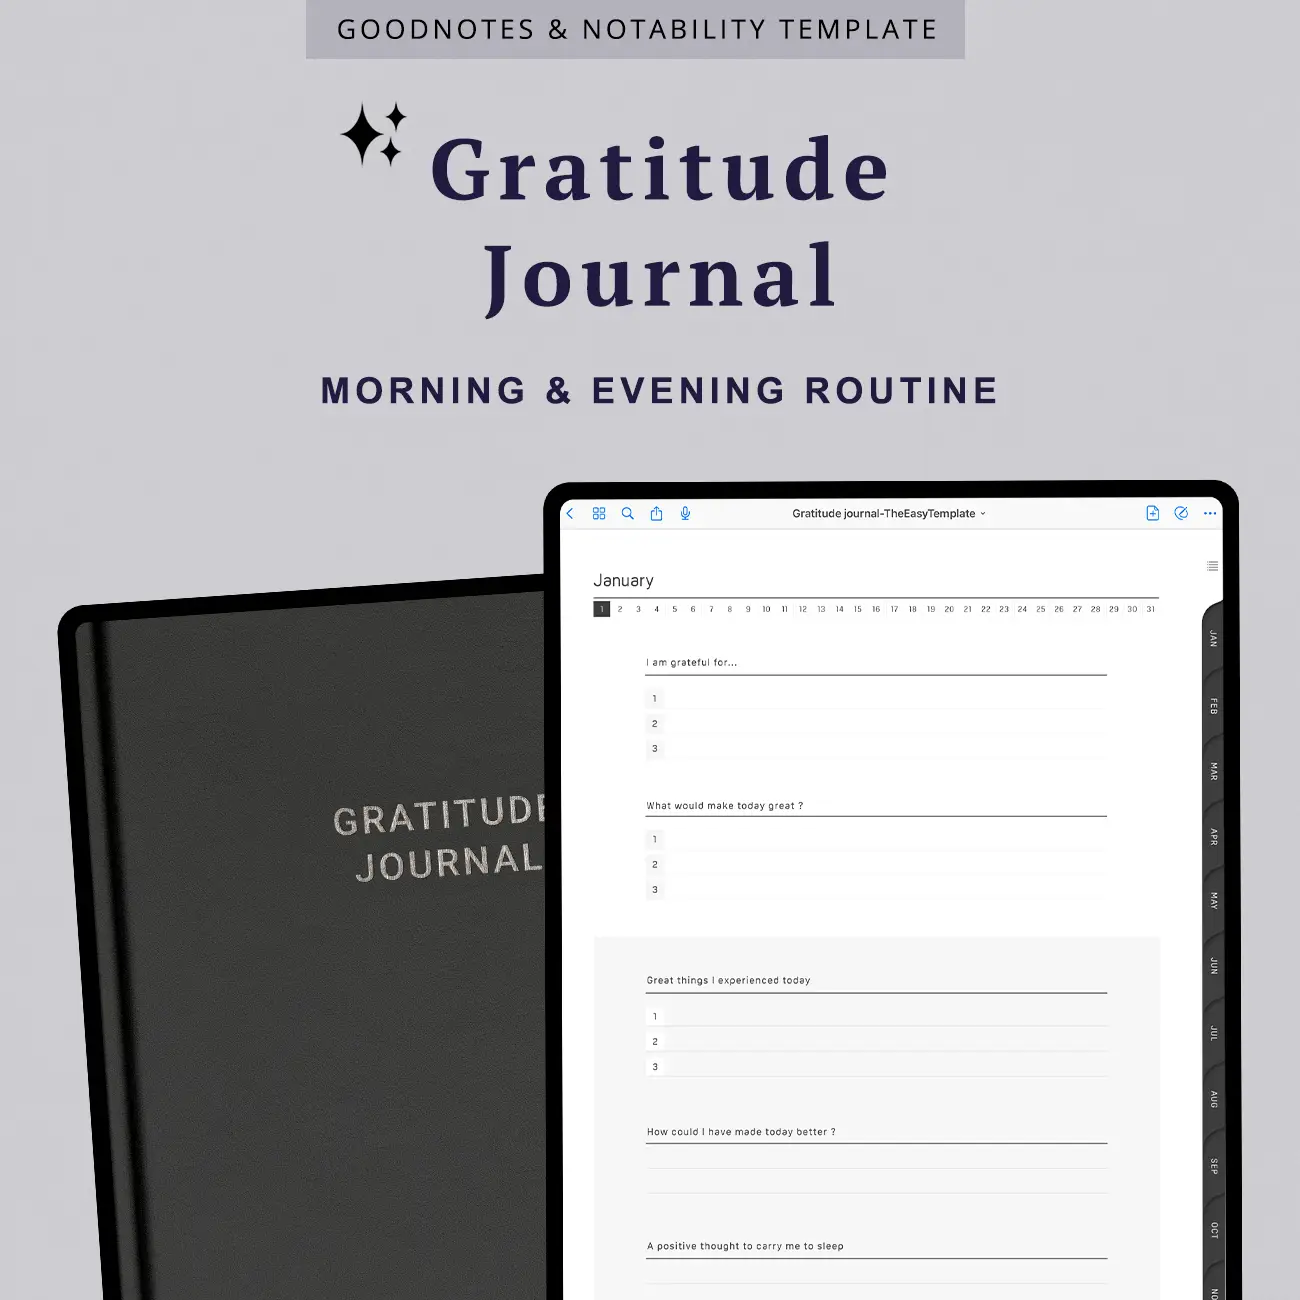 Daily Gratitude Journal for Women - 6 Months Positivity and